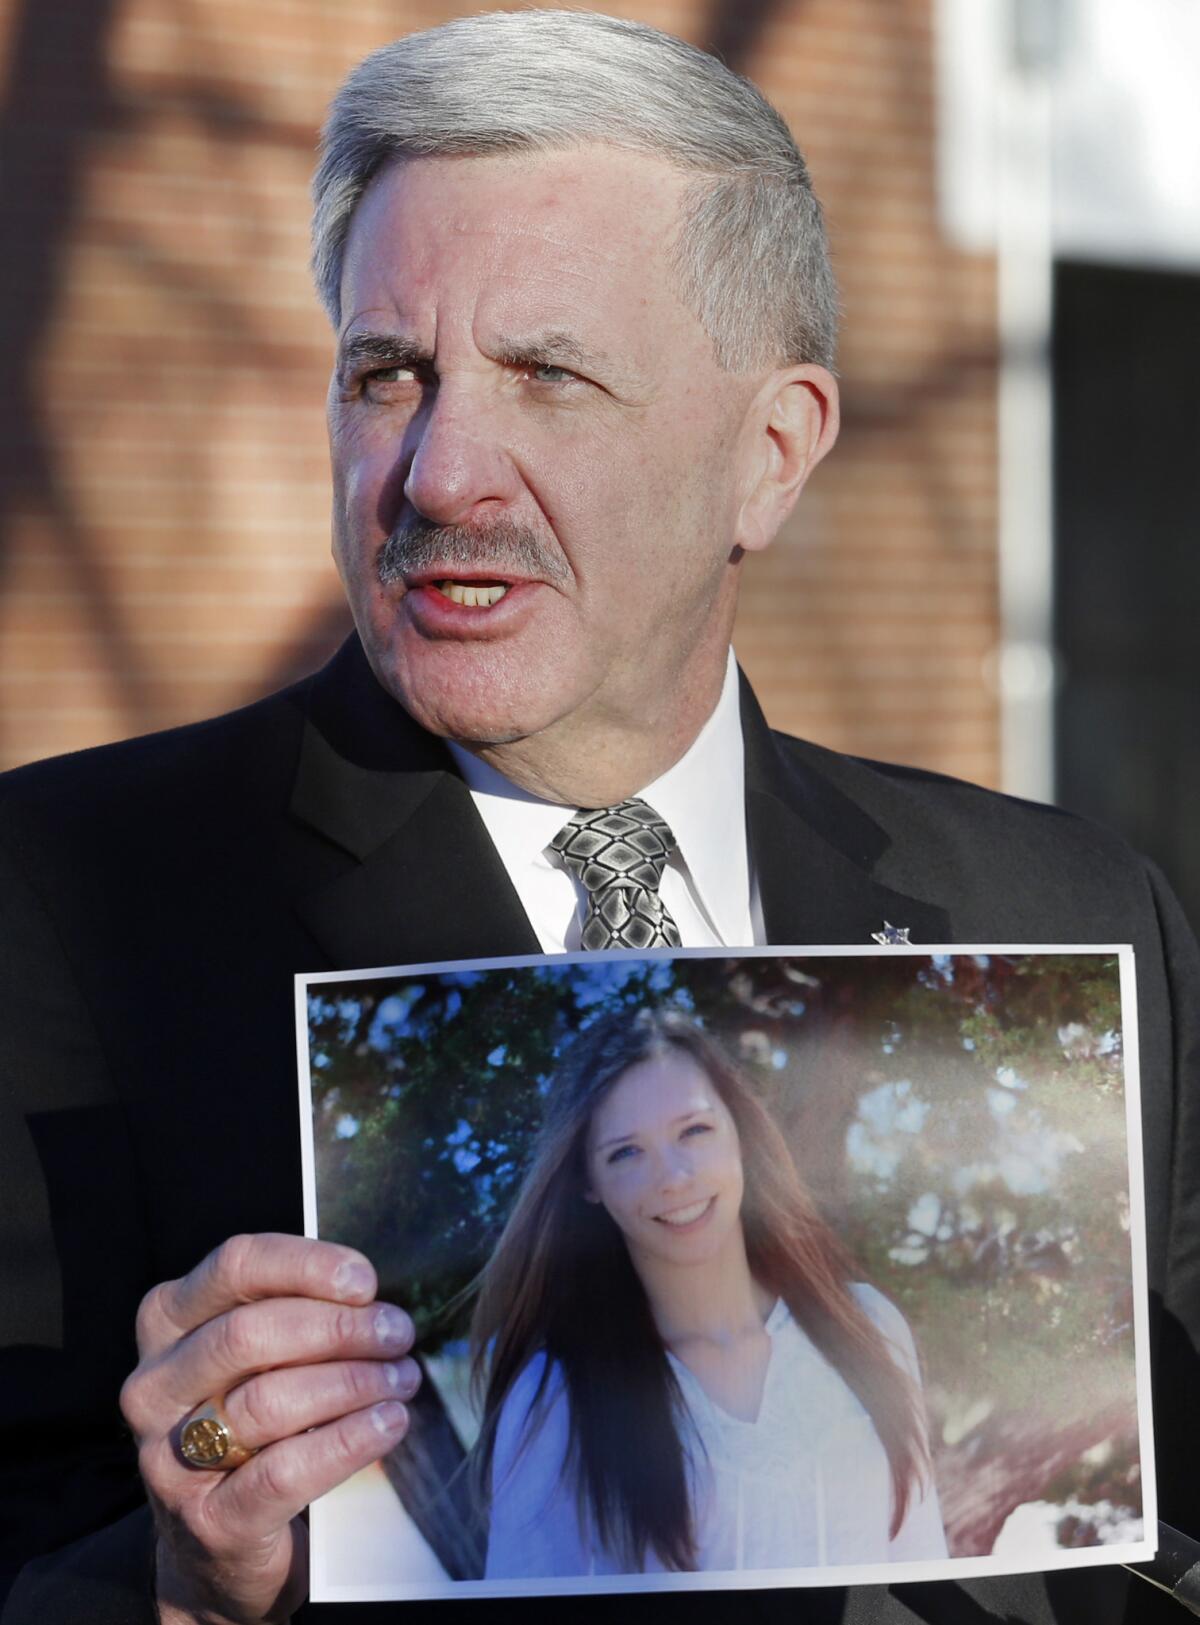 Arapahoe County Sheriff Grayson Robinson holds a picture of Claire Davis, the 17-year-old student who was shot at a Colorado high school Friday. She remained in critical condition Saturday.